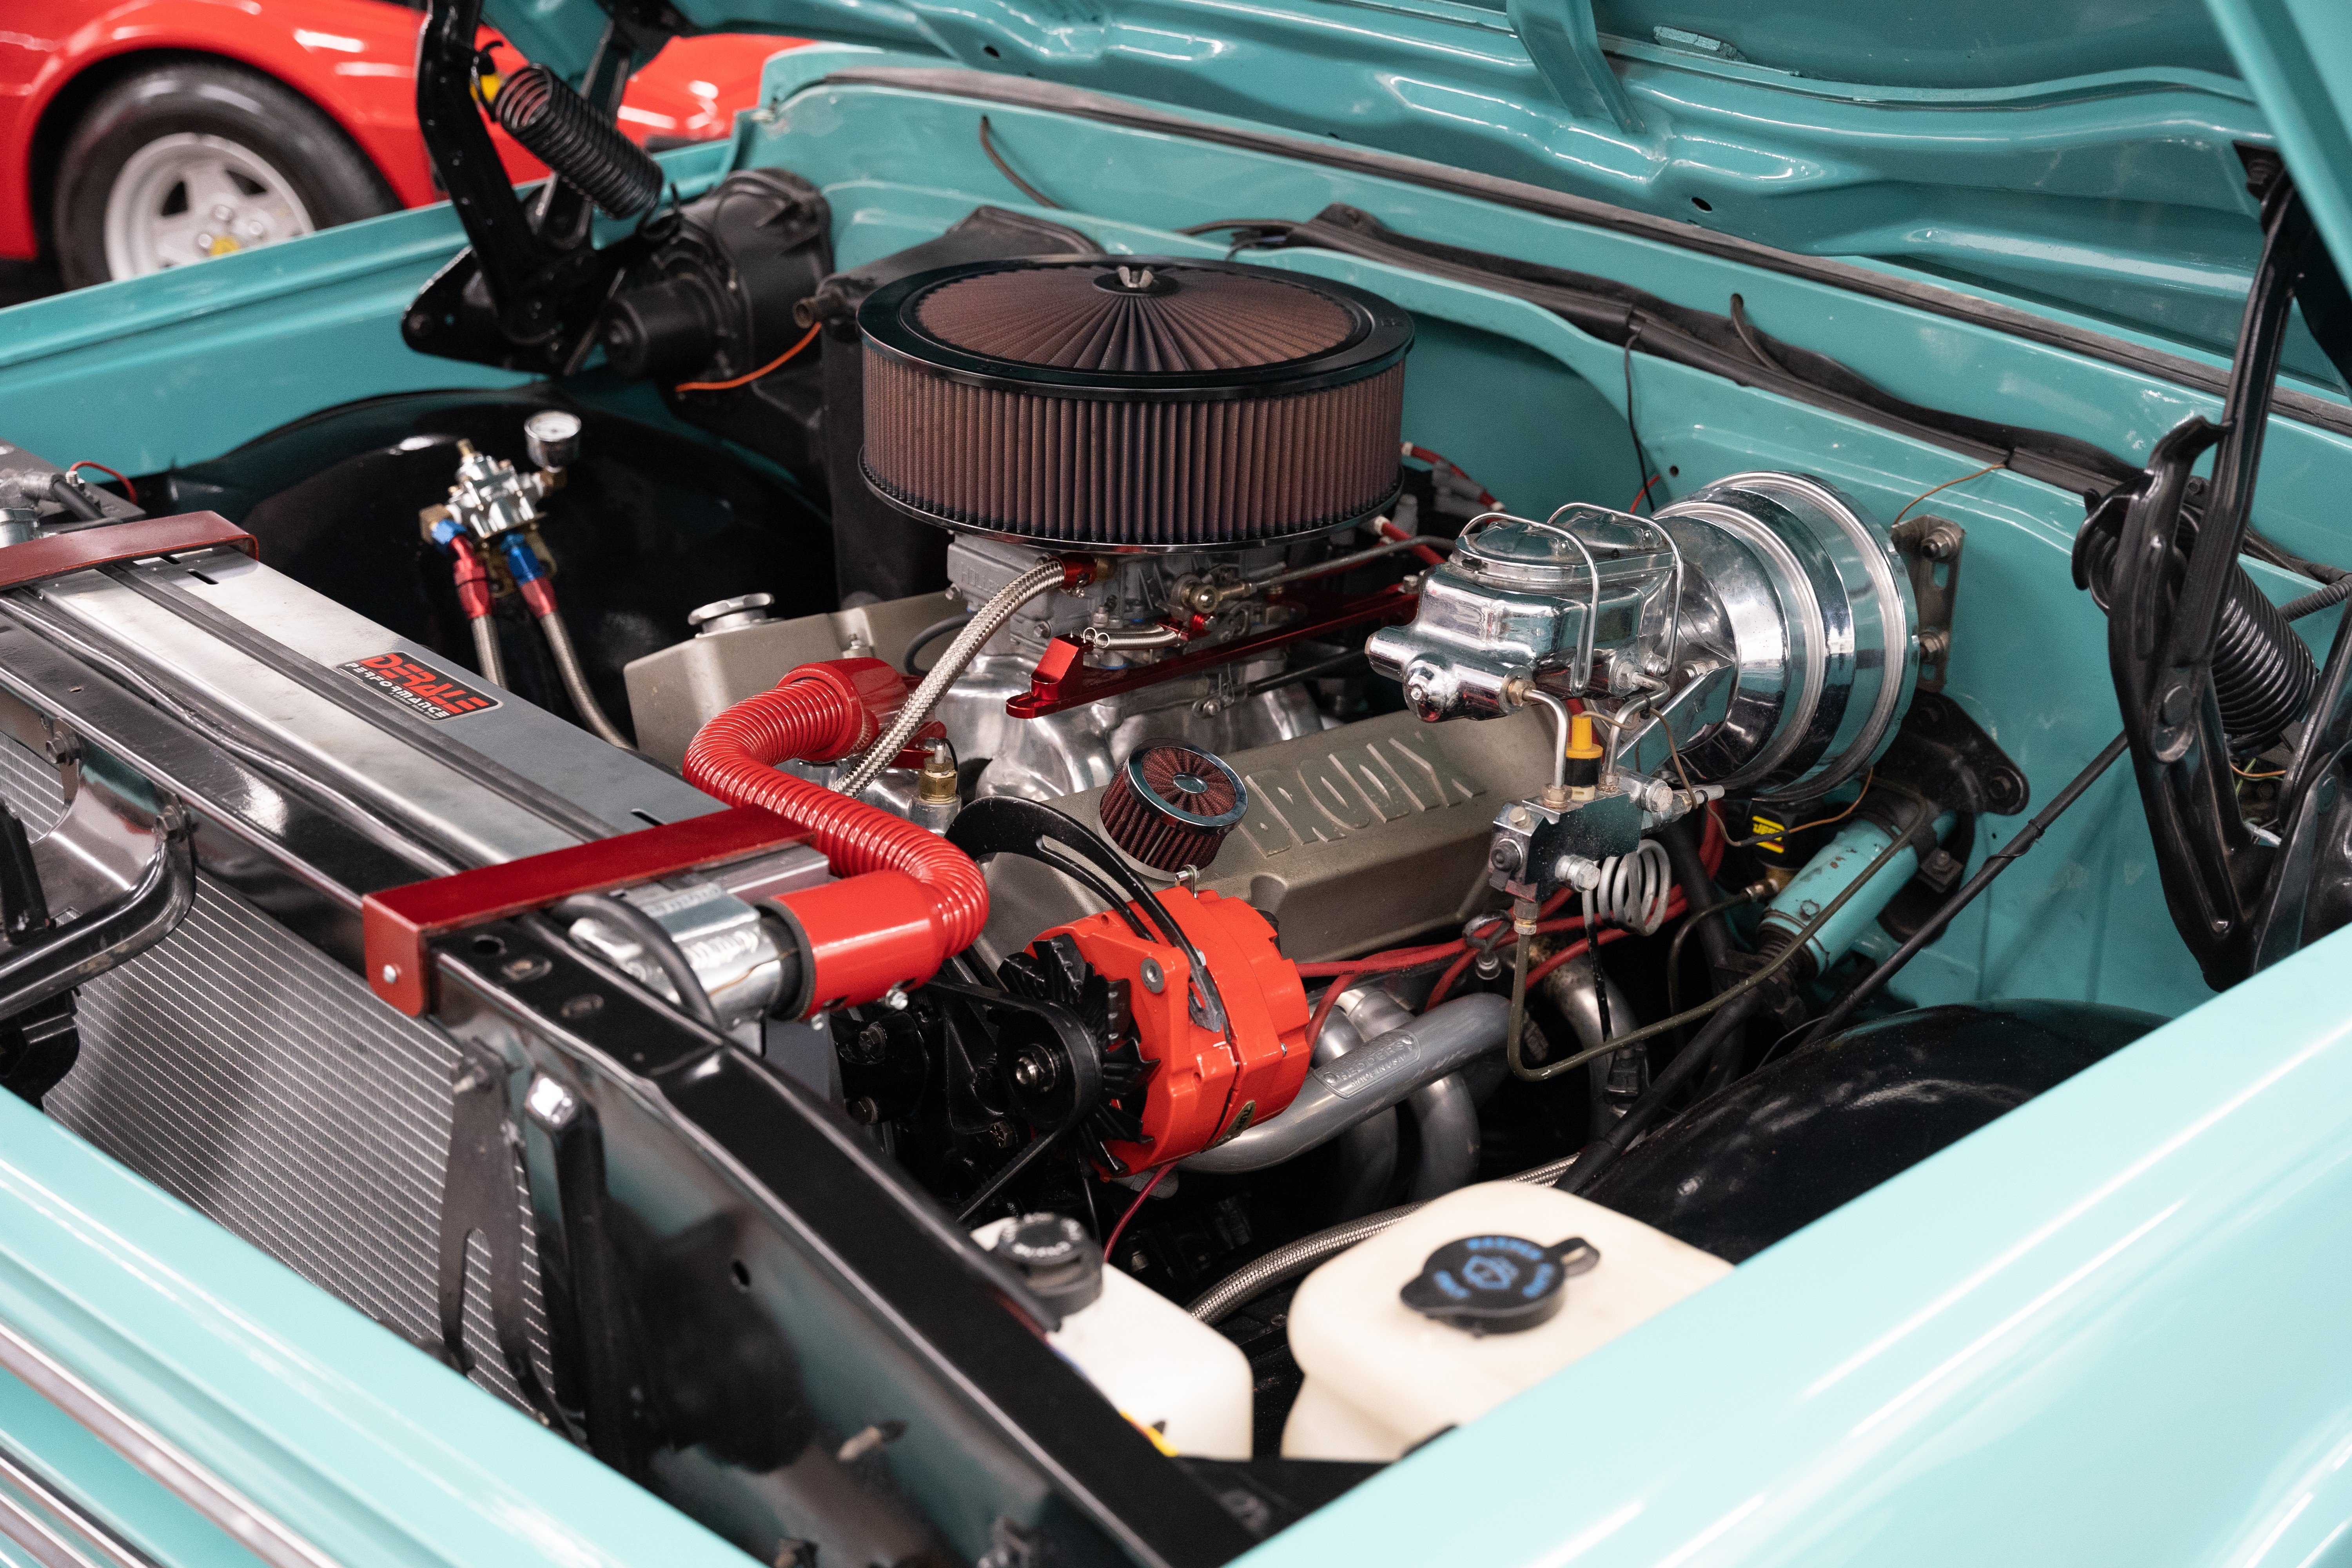 Engine bay in a Pro Street modified 1968 Chevrolet C10 pickup.